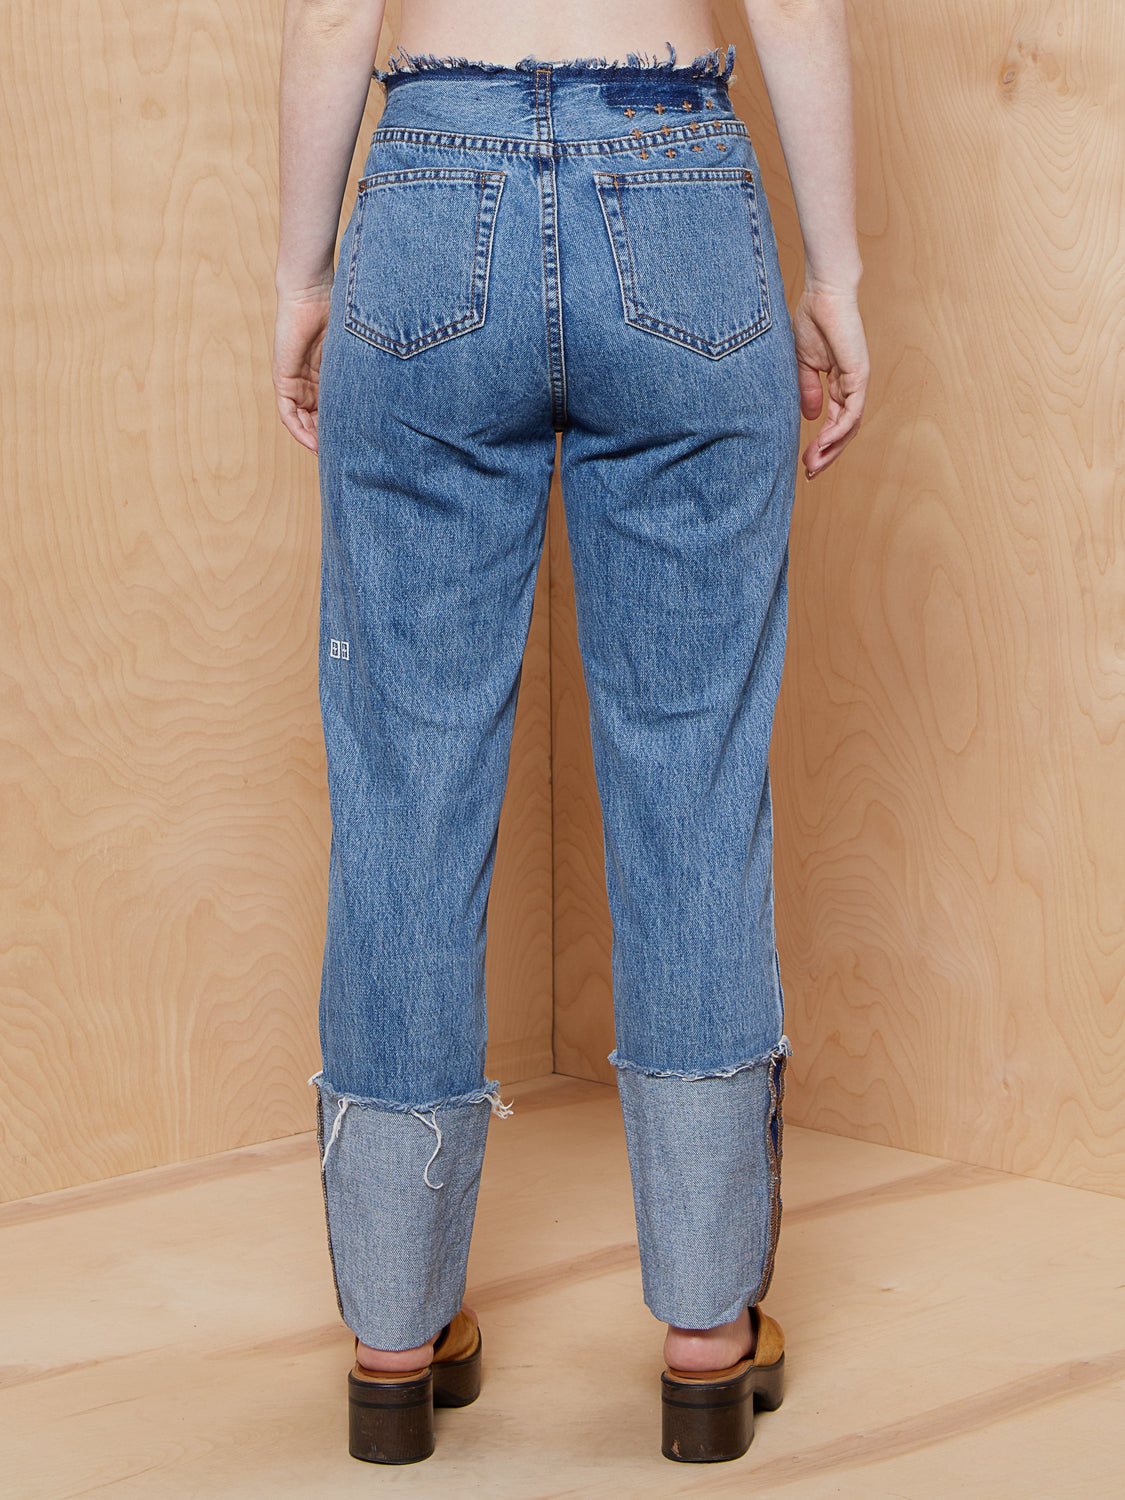 Paradox of Deaire Cuffed Jeans